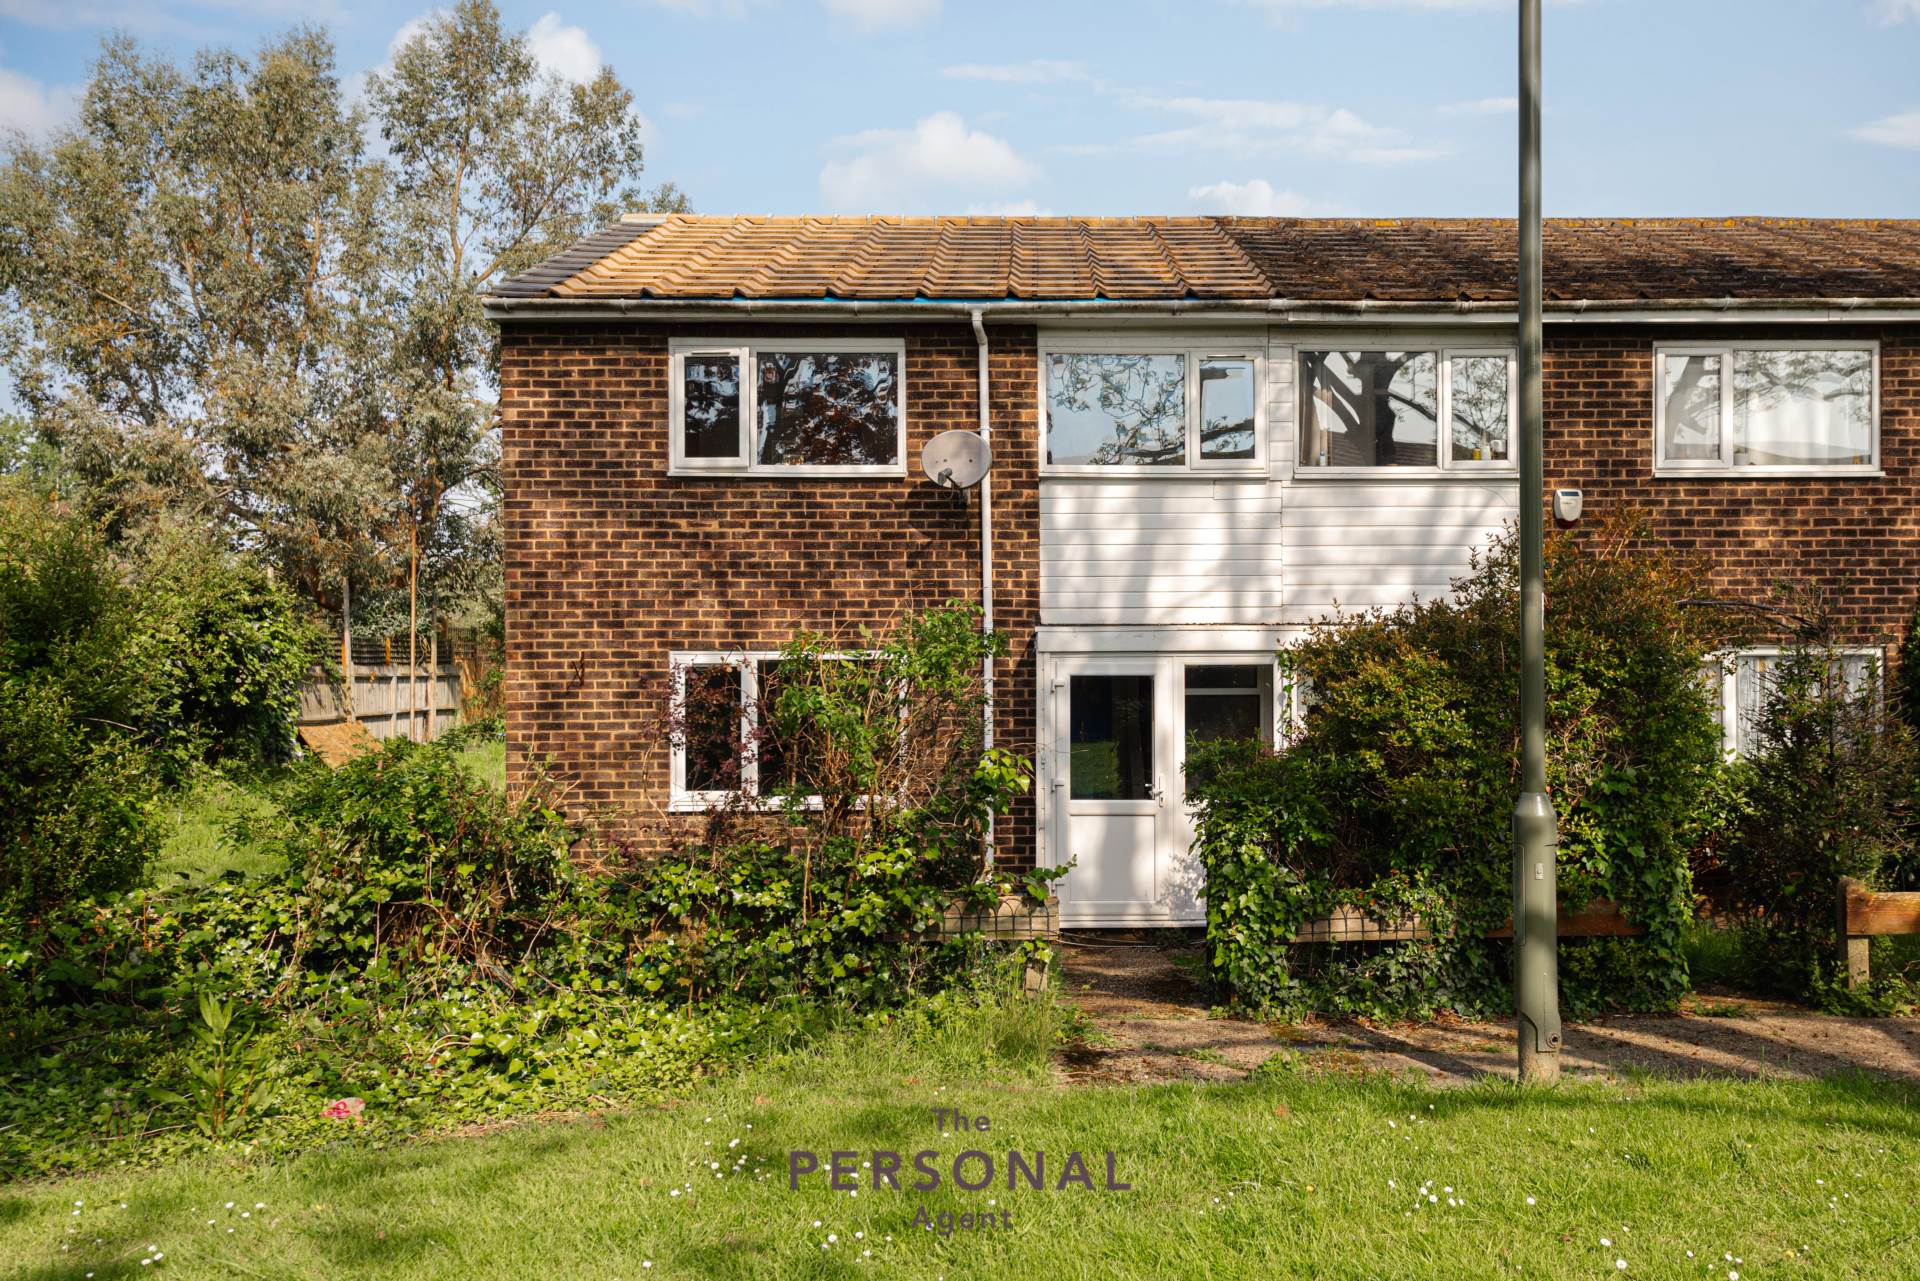 3 bed End Terraced House for rent in Epsom. From The Personal Agent - Epsom